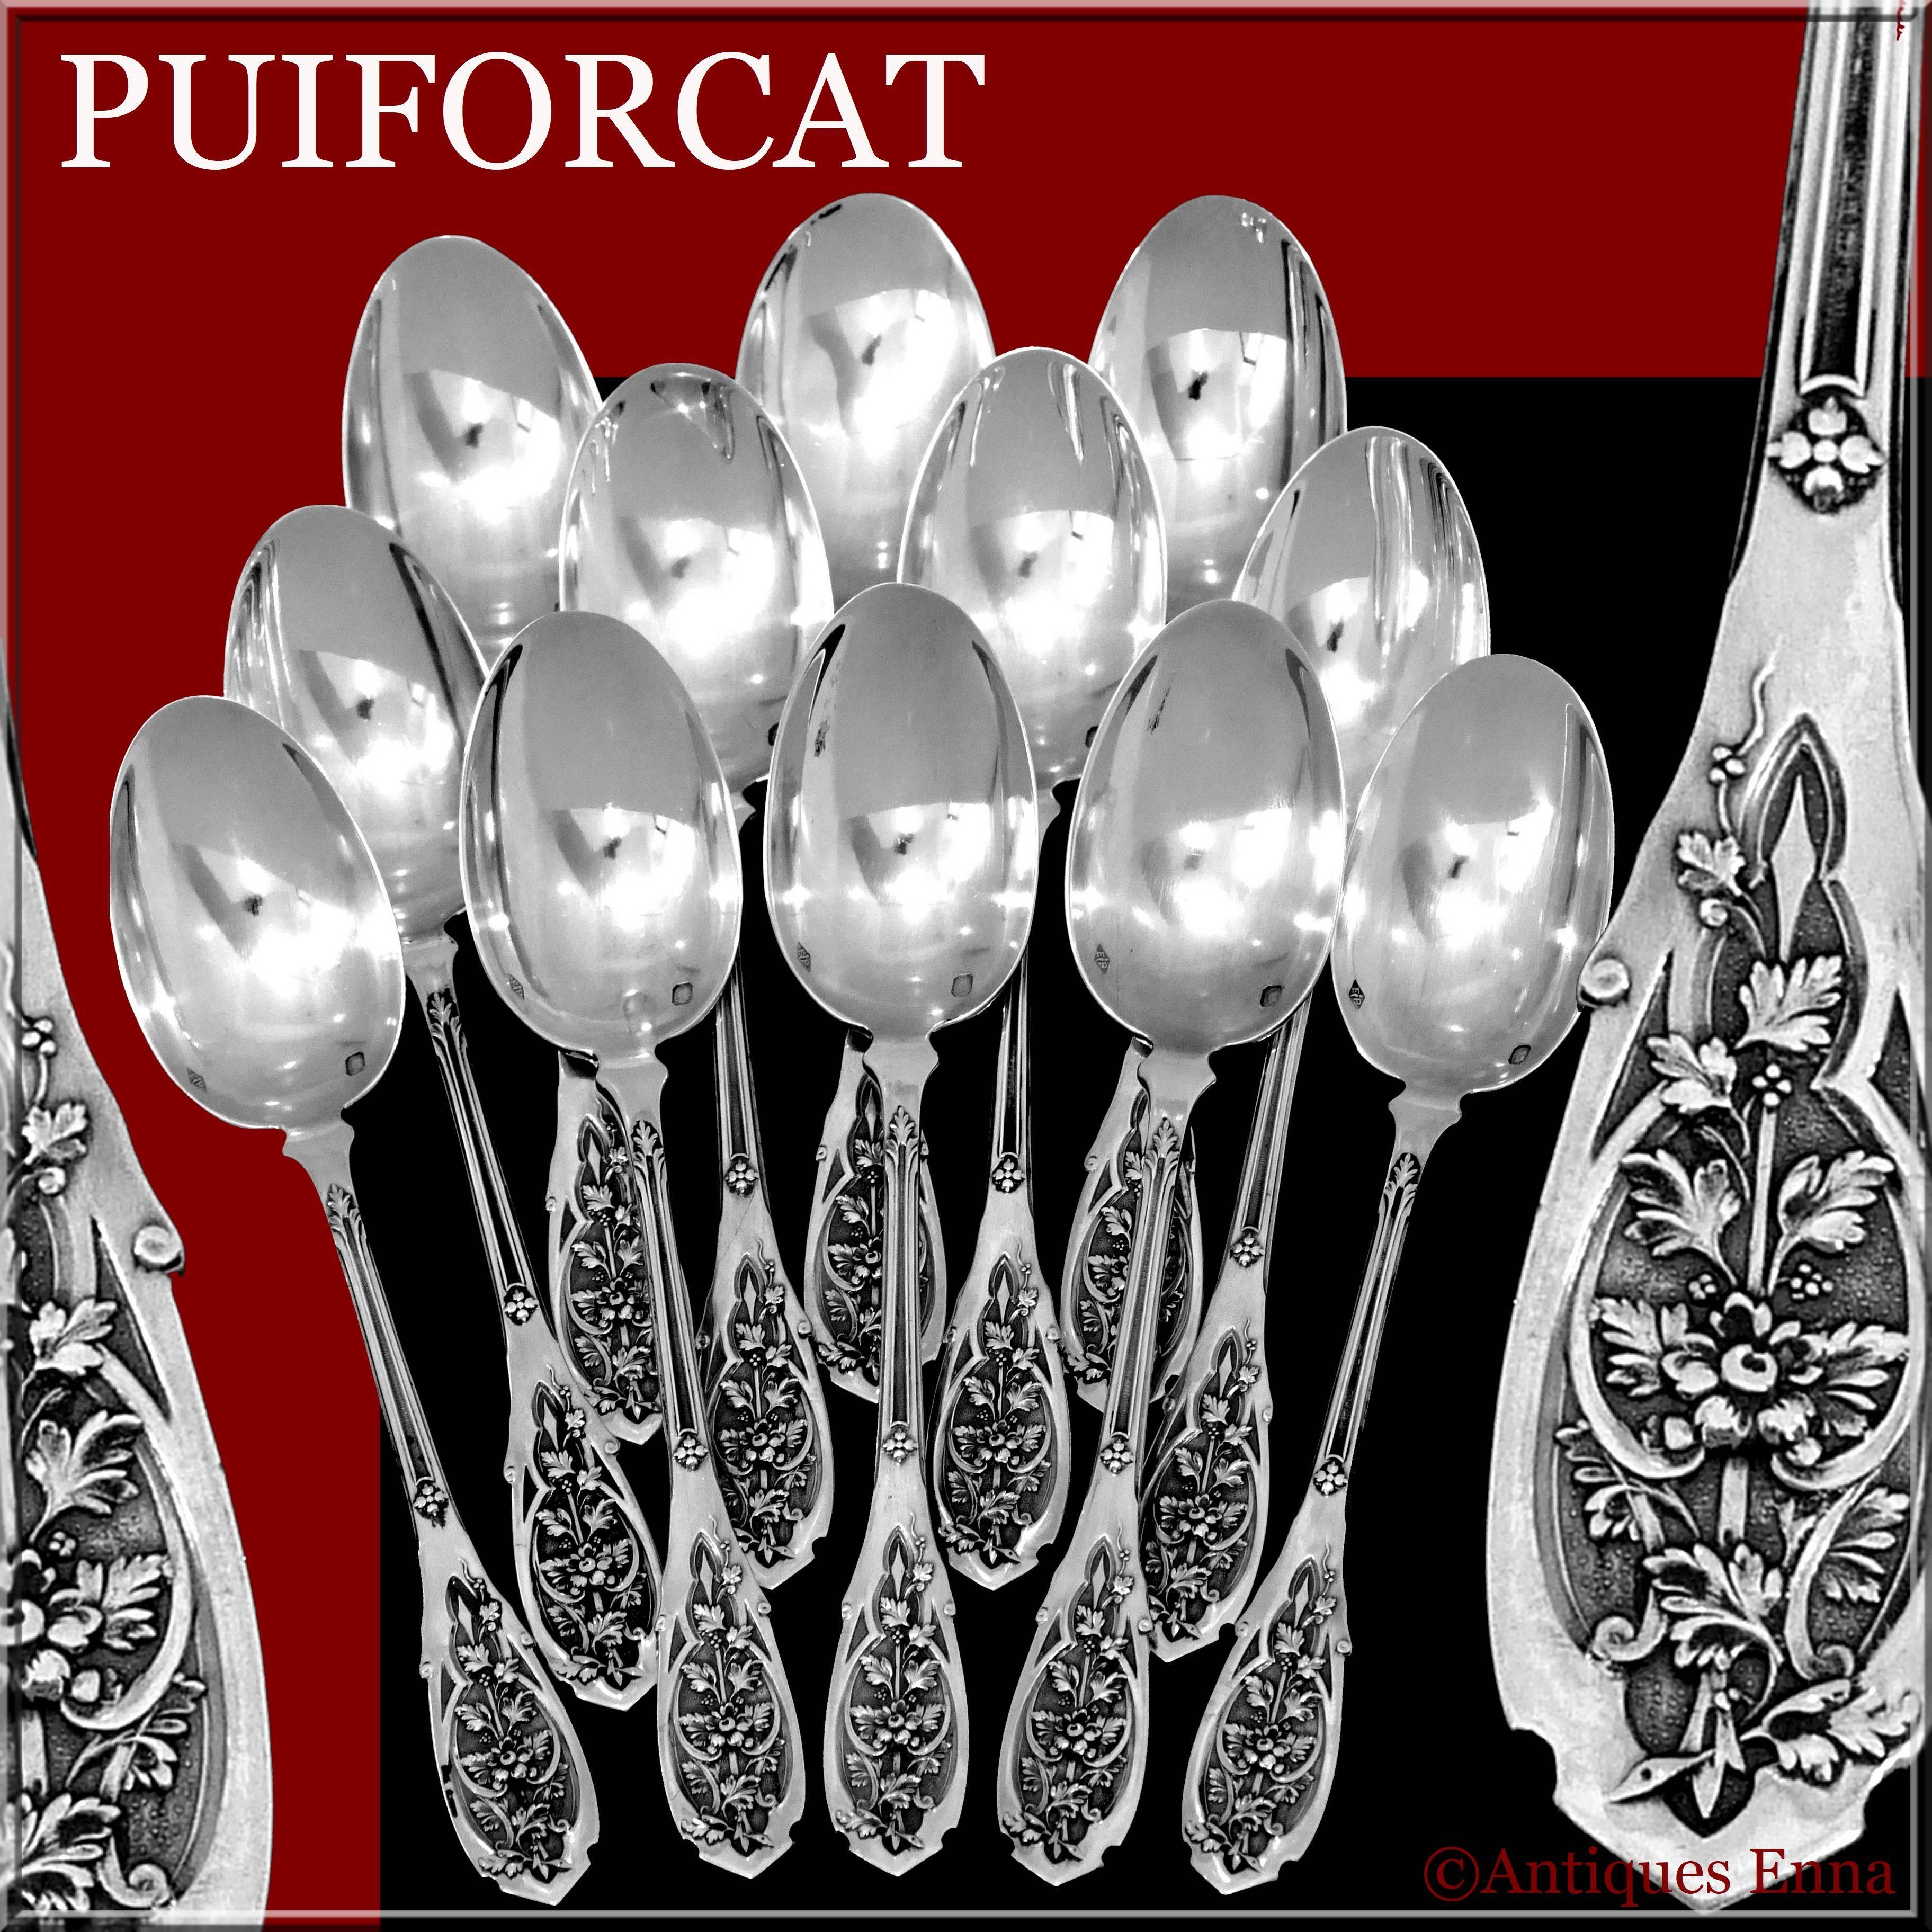 Late 19th Century Puiforcat French Sterling Silver Tea Coffee Dessert Spoons Set 12 Pc, Moderne